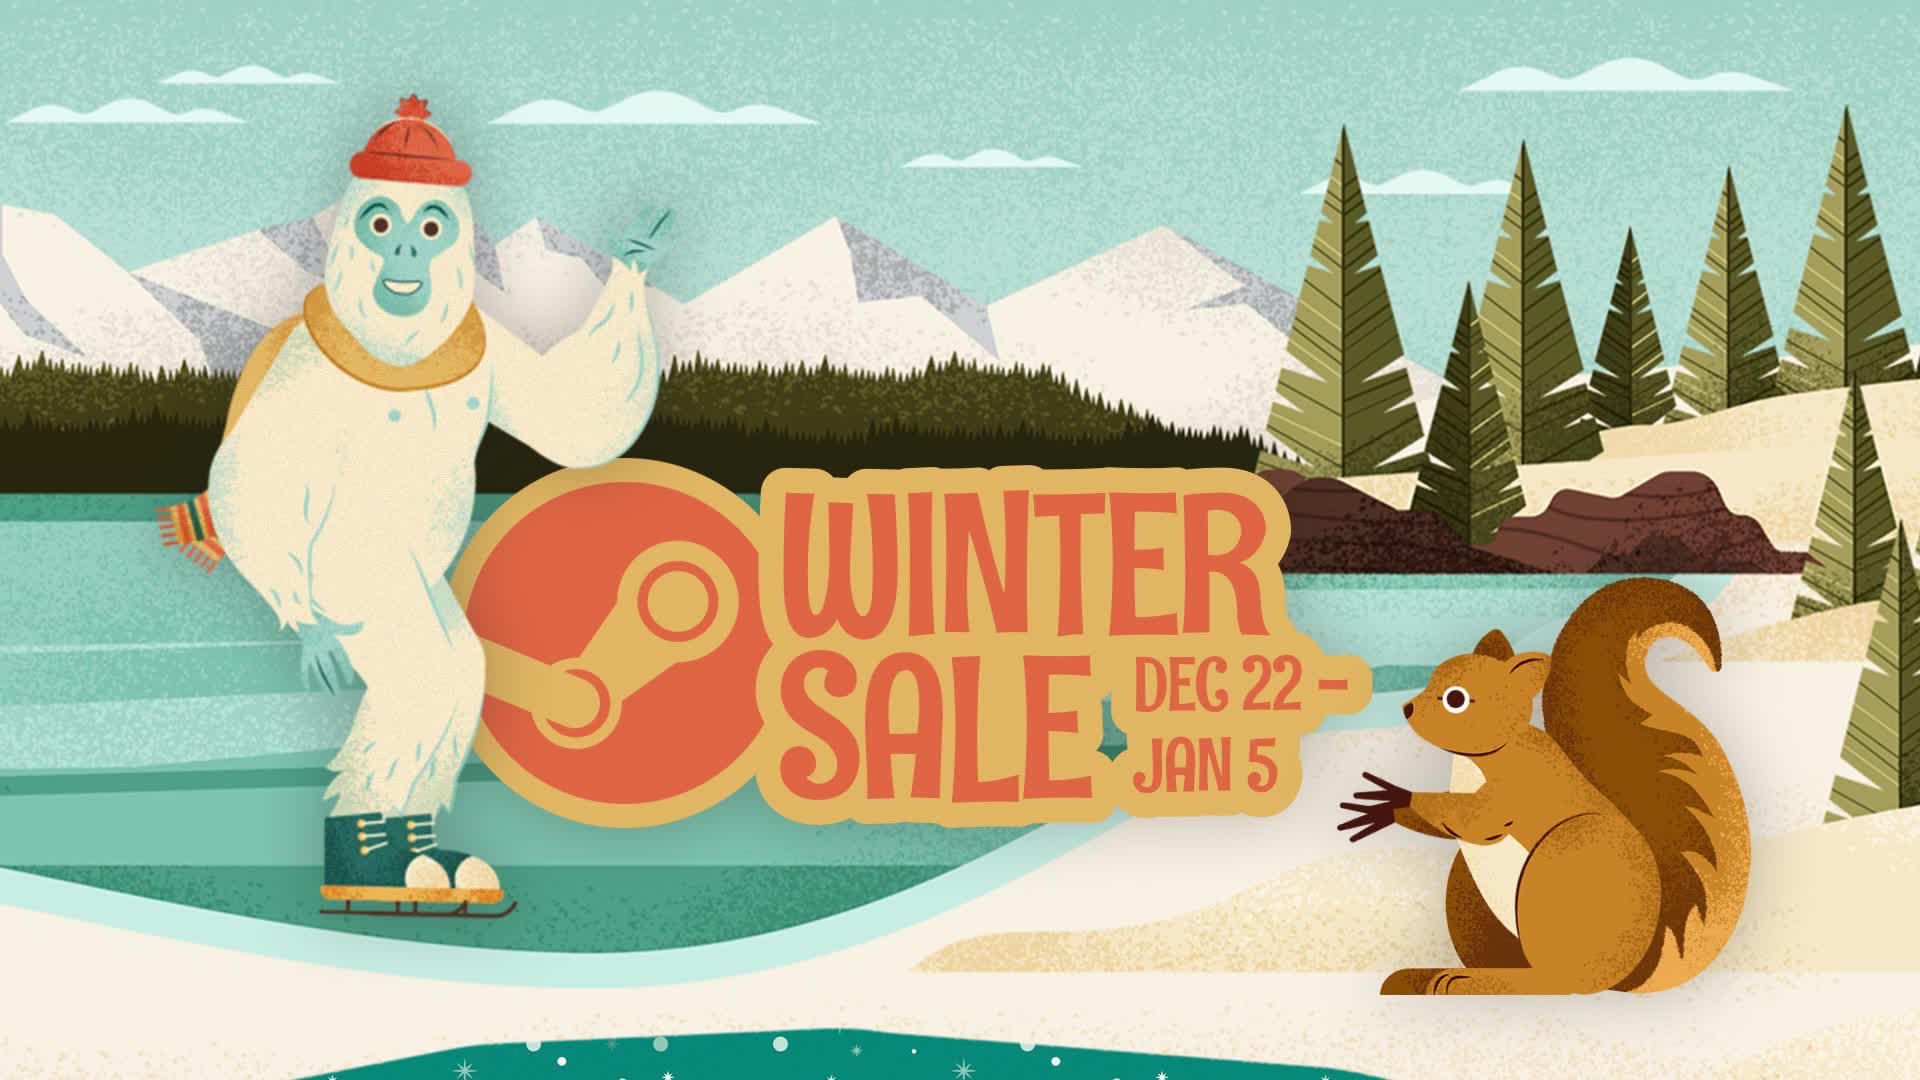 Steam's Winter Sale is now live: discounts, Steam Awards, and free stickers aplenty